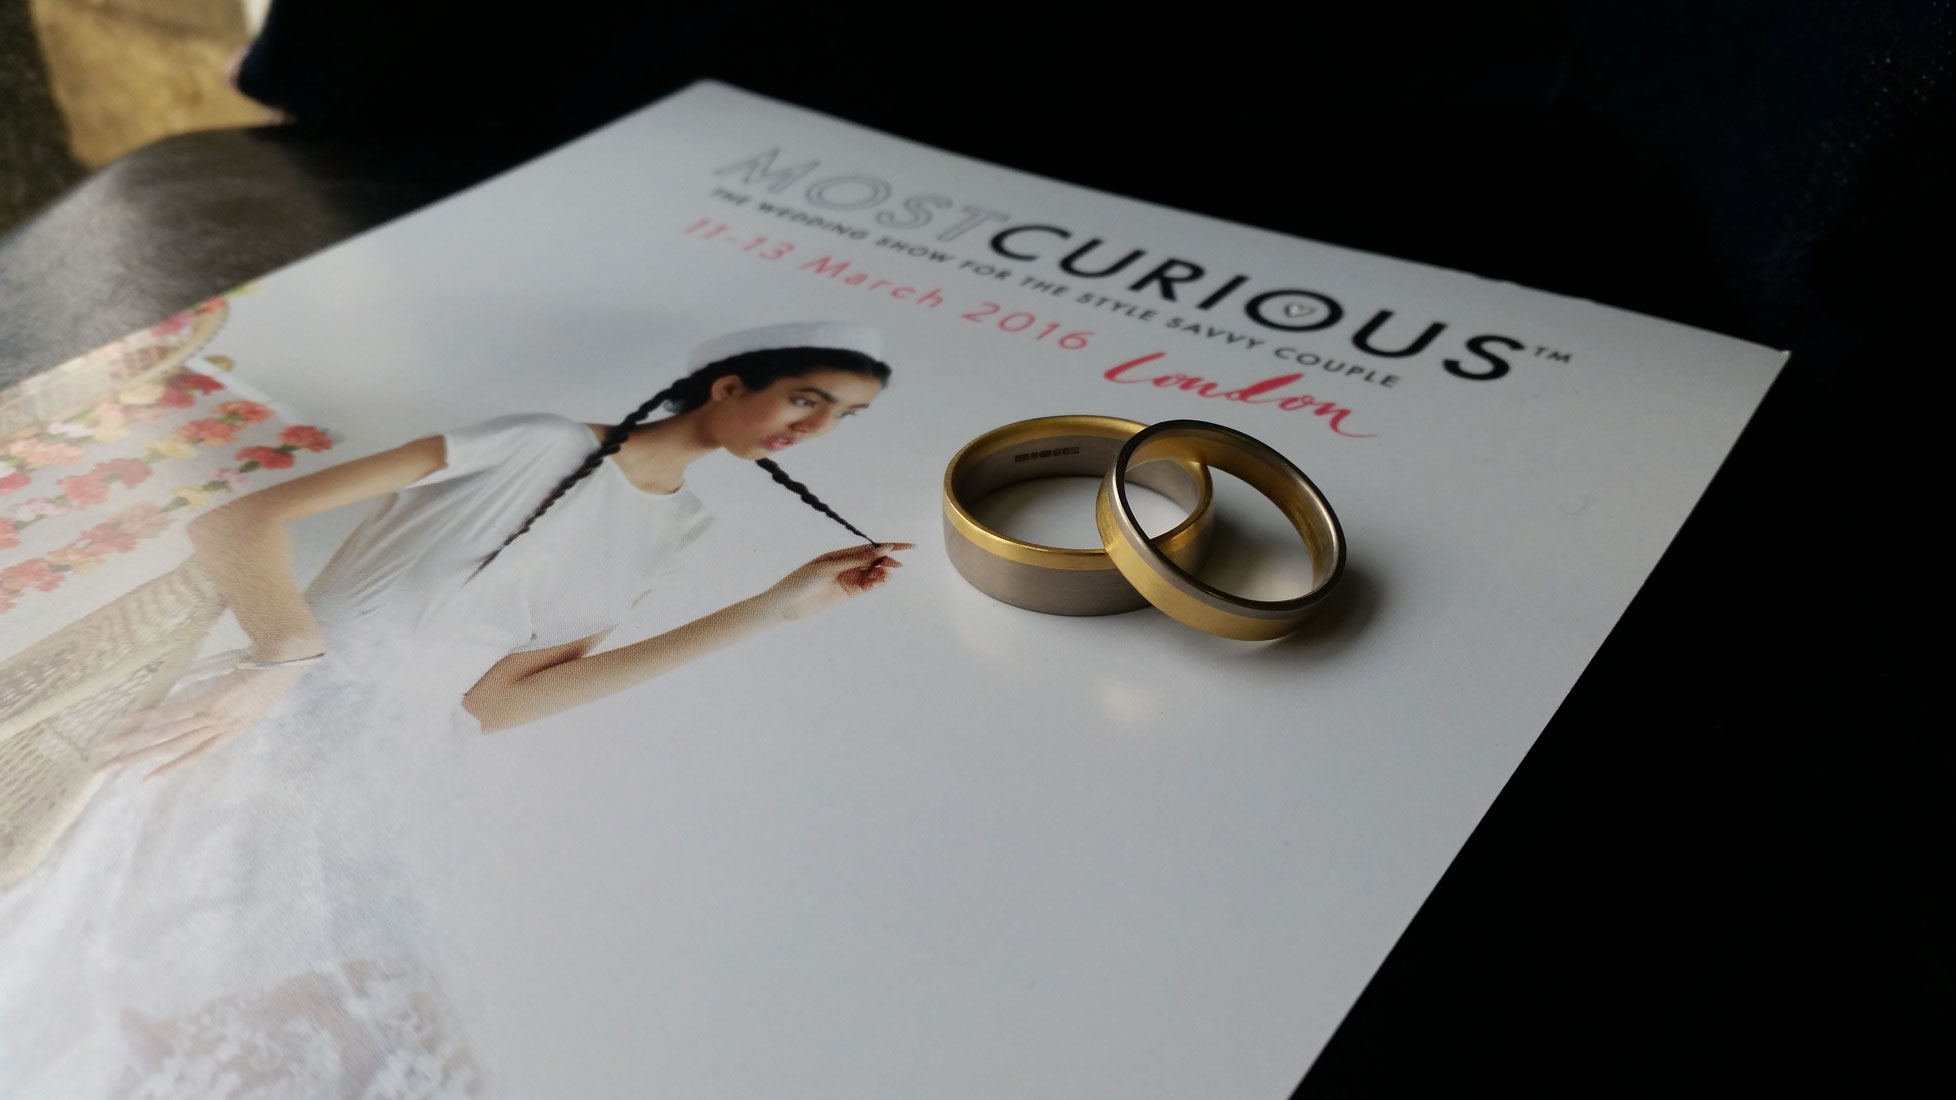 Most Curious Wedding Fair flyer from 2016 with Amanda's two tone Fairtrade Gold wedding rings on top.